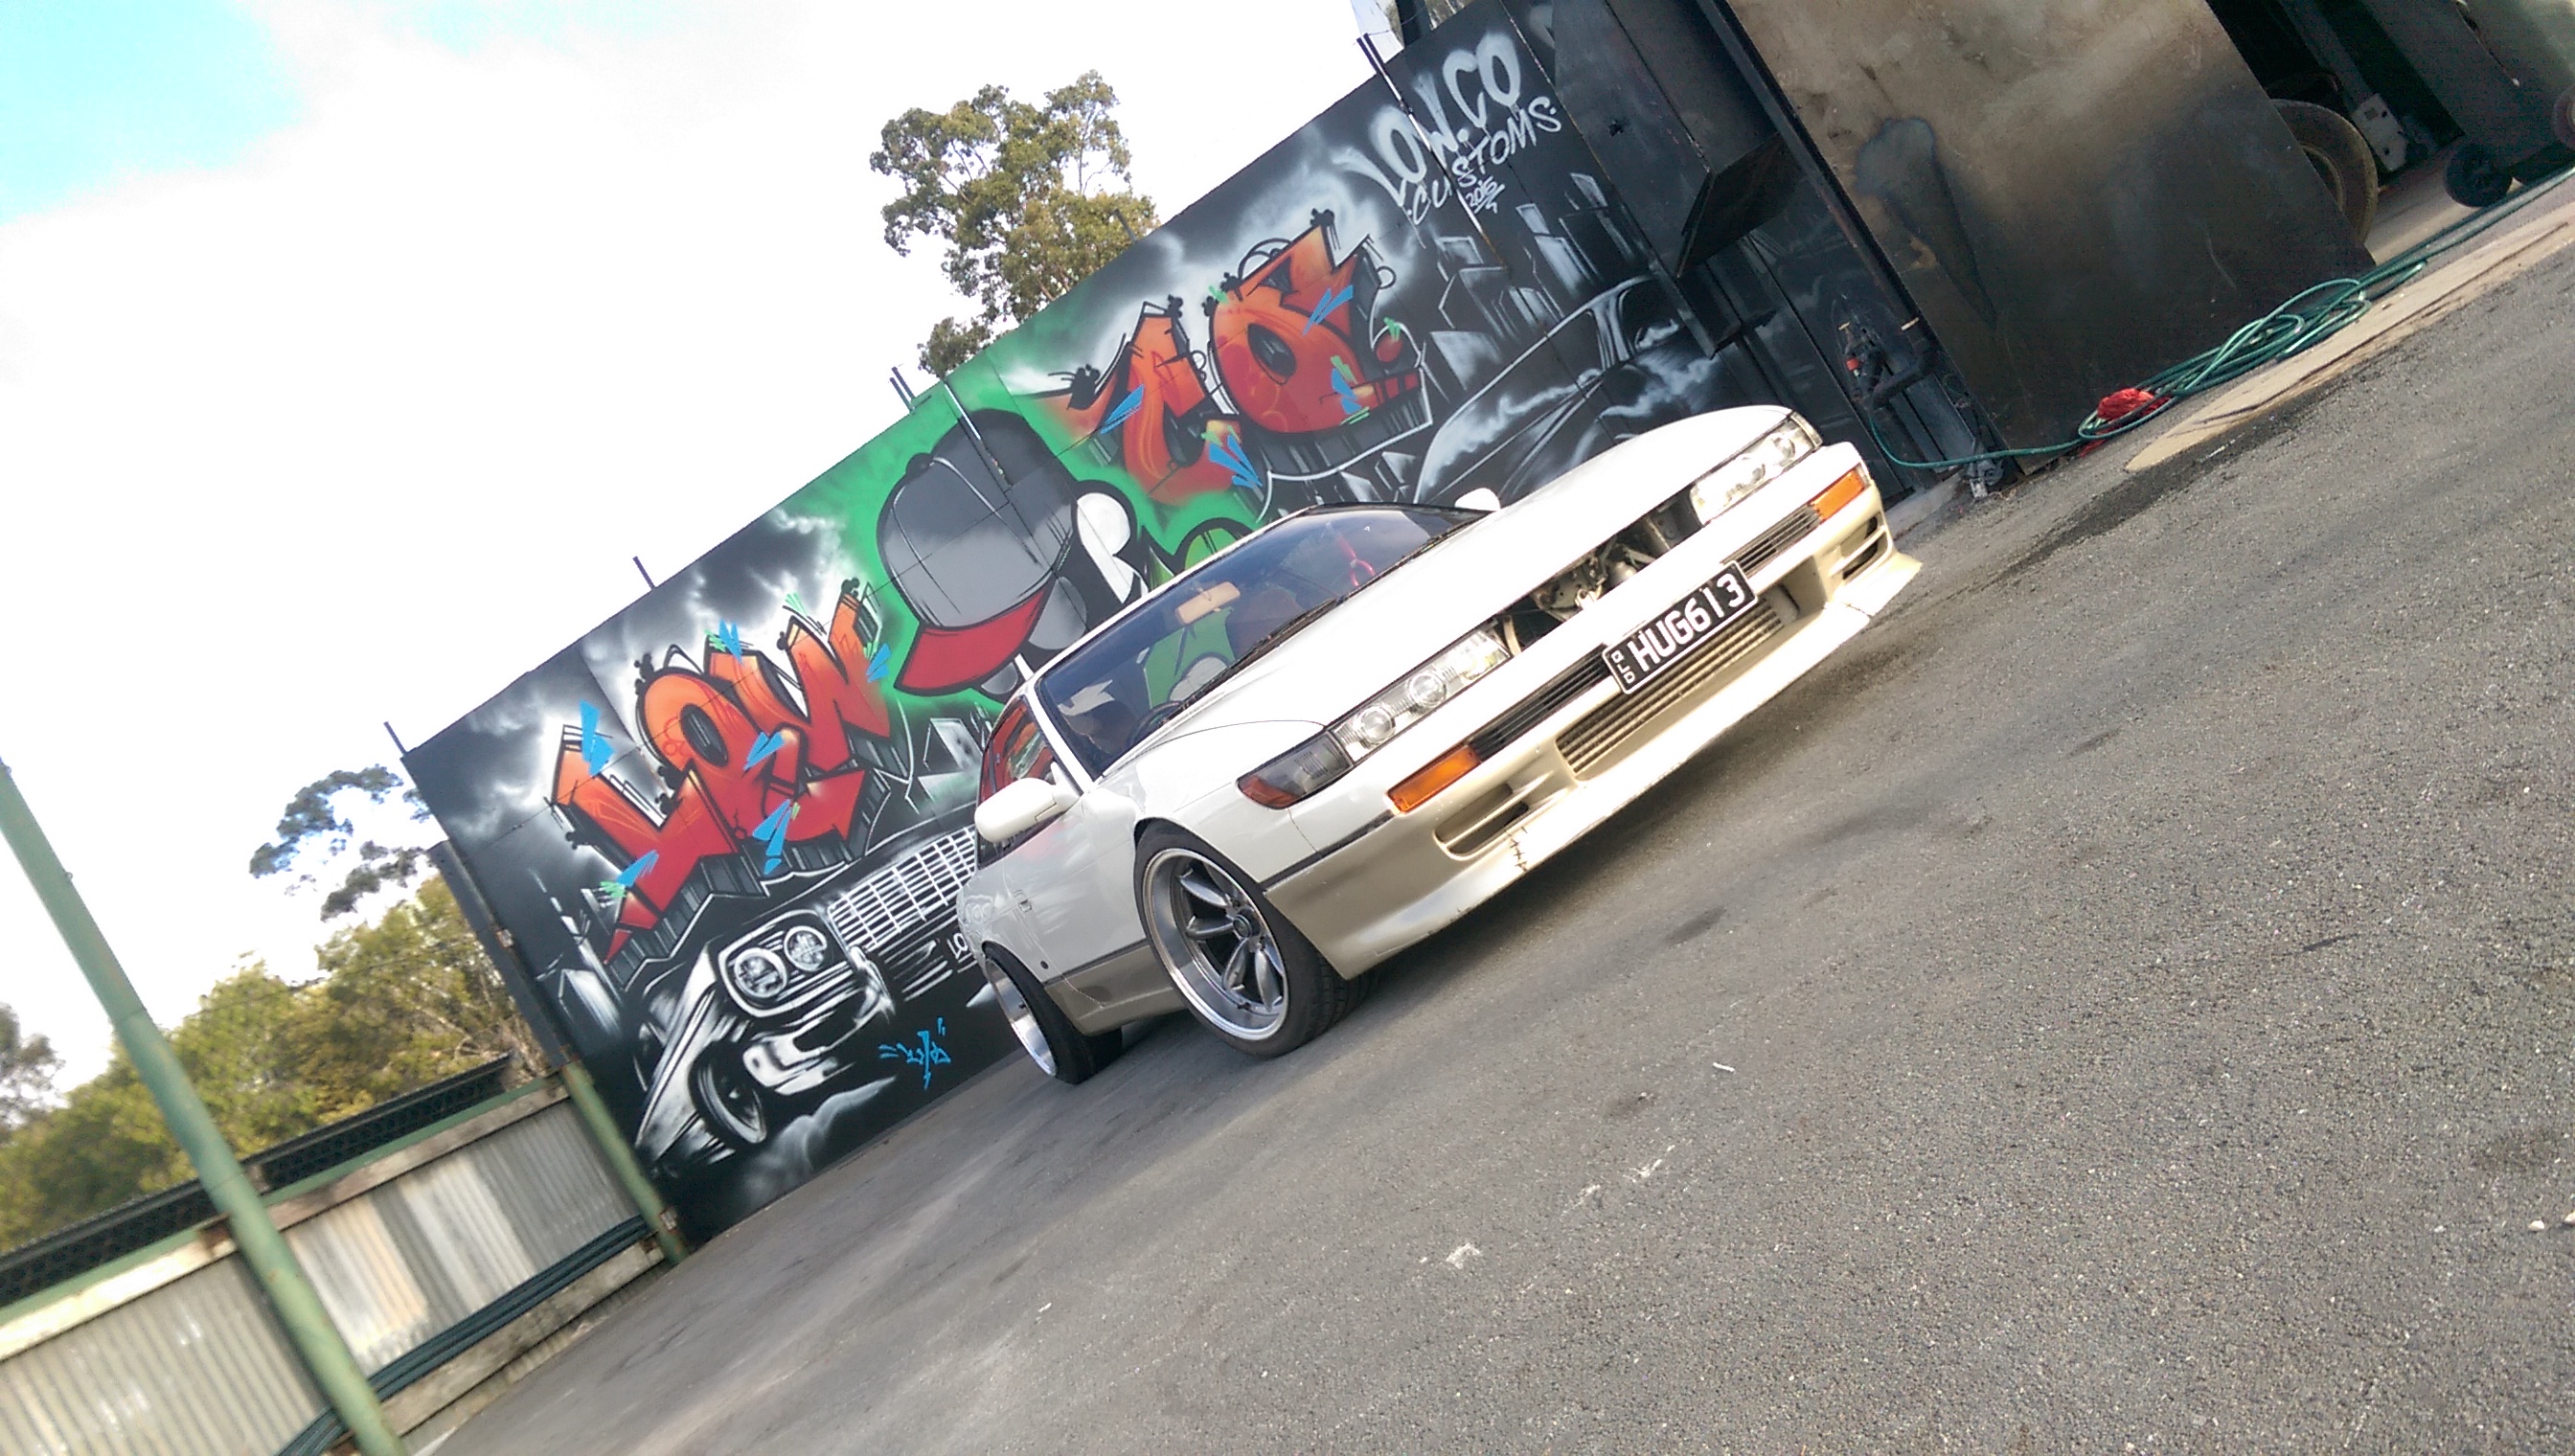 1989 Nissan Silvia For Sale or Swap | QLD: Gold Coast #2741971